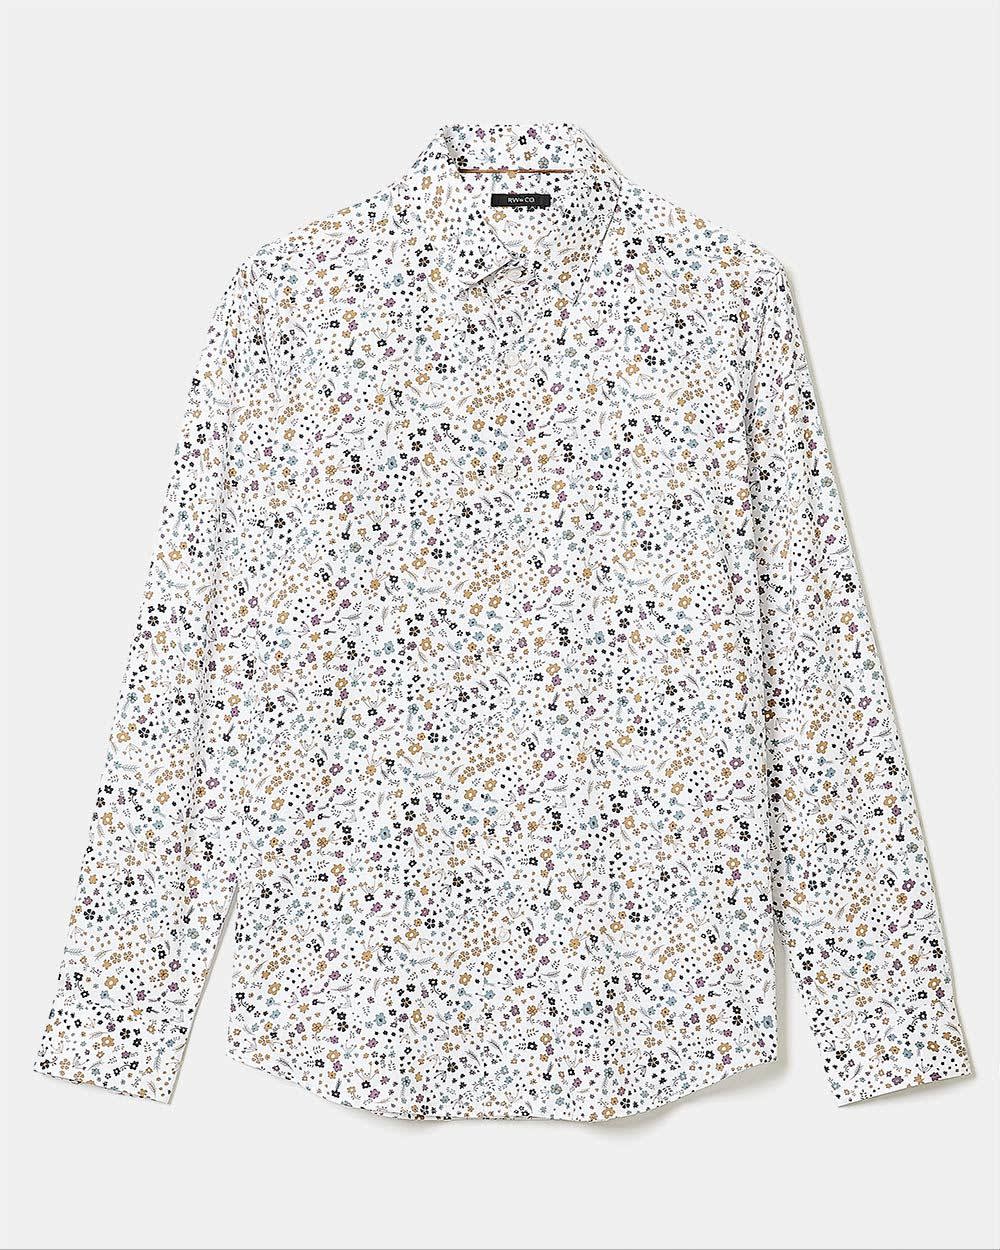 Slim Fit White Dress Shirt with Floral Pattern | RW&CO.